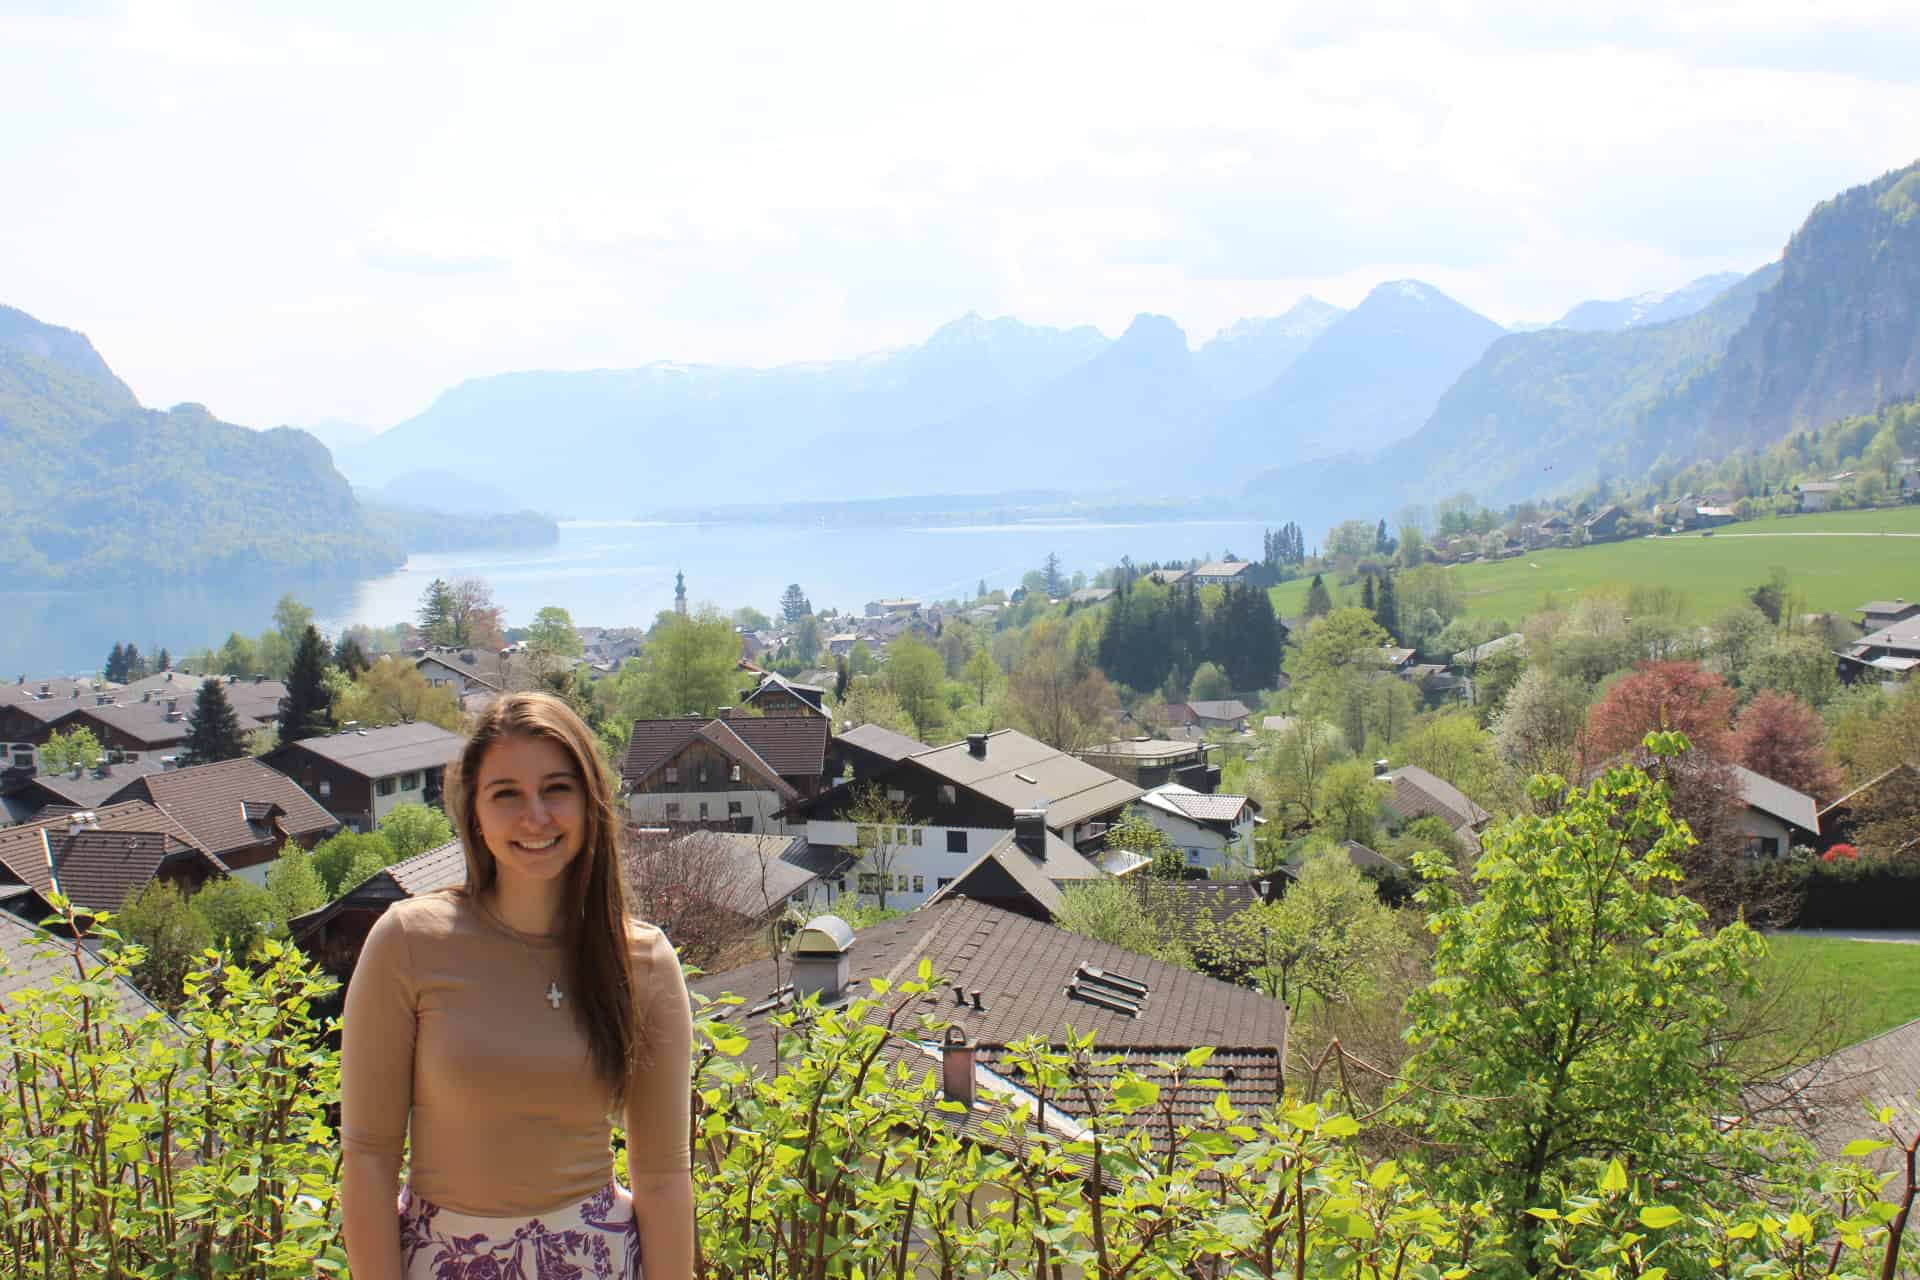 A girl standing in front of the Austrian alps and a village in the valley.